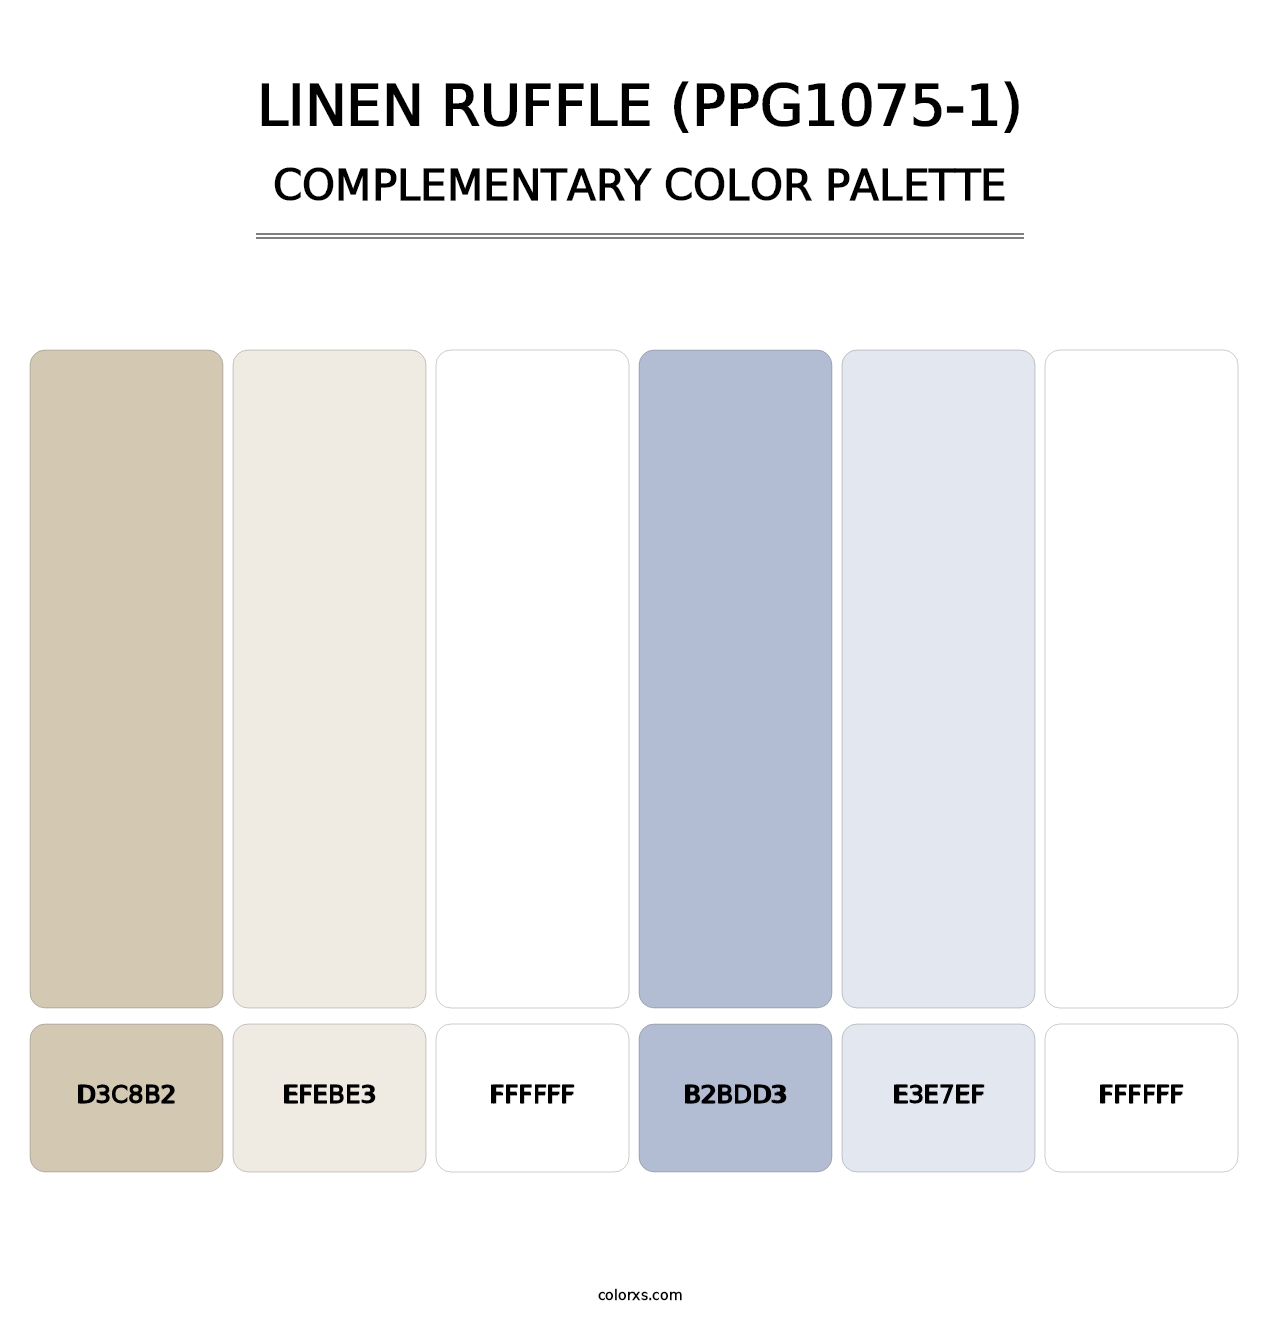 Linen Ruffle (PPG1075-1) - Complementary Color Palette